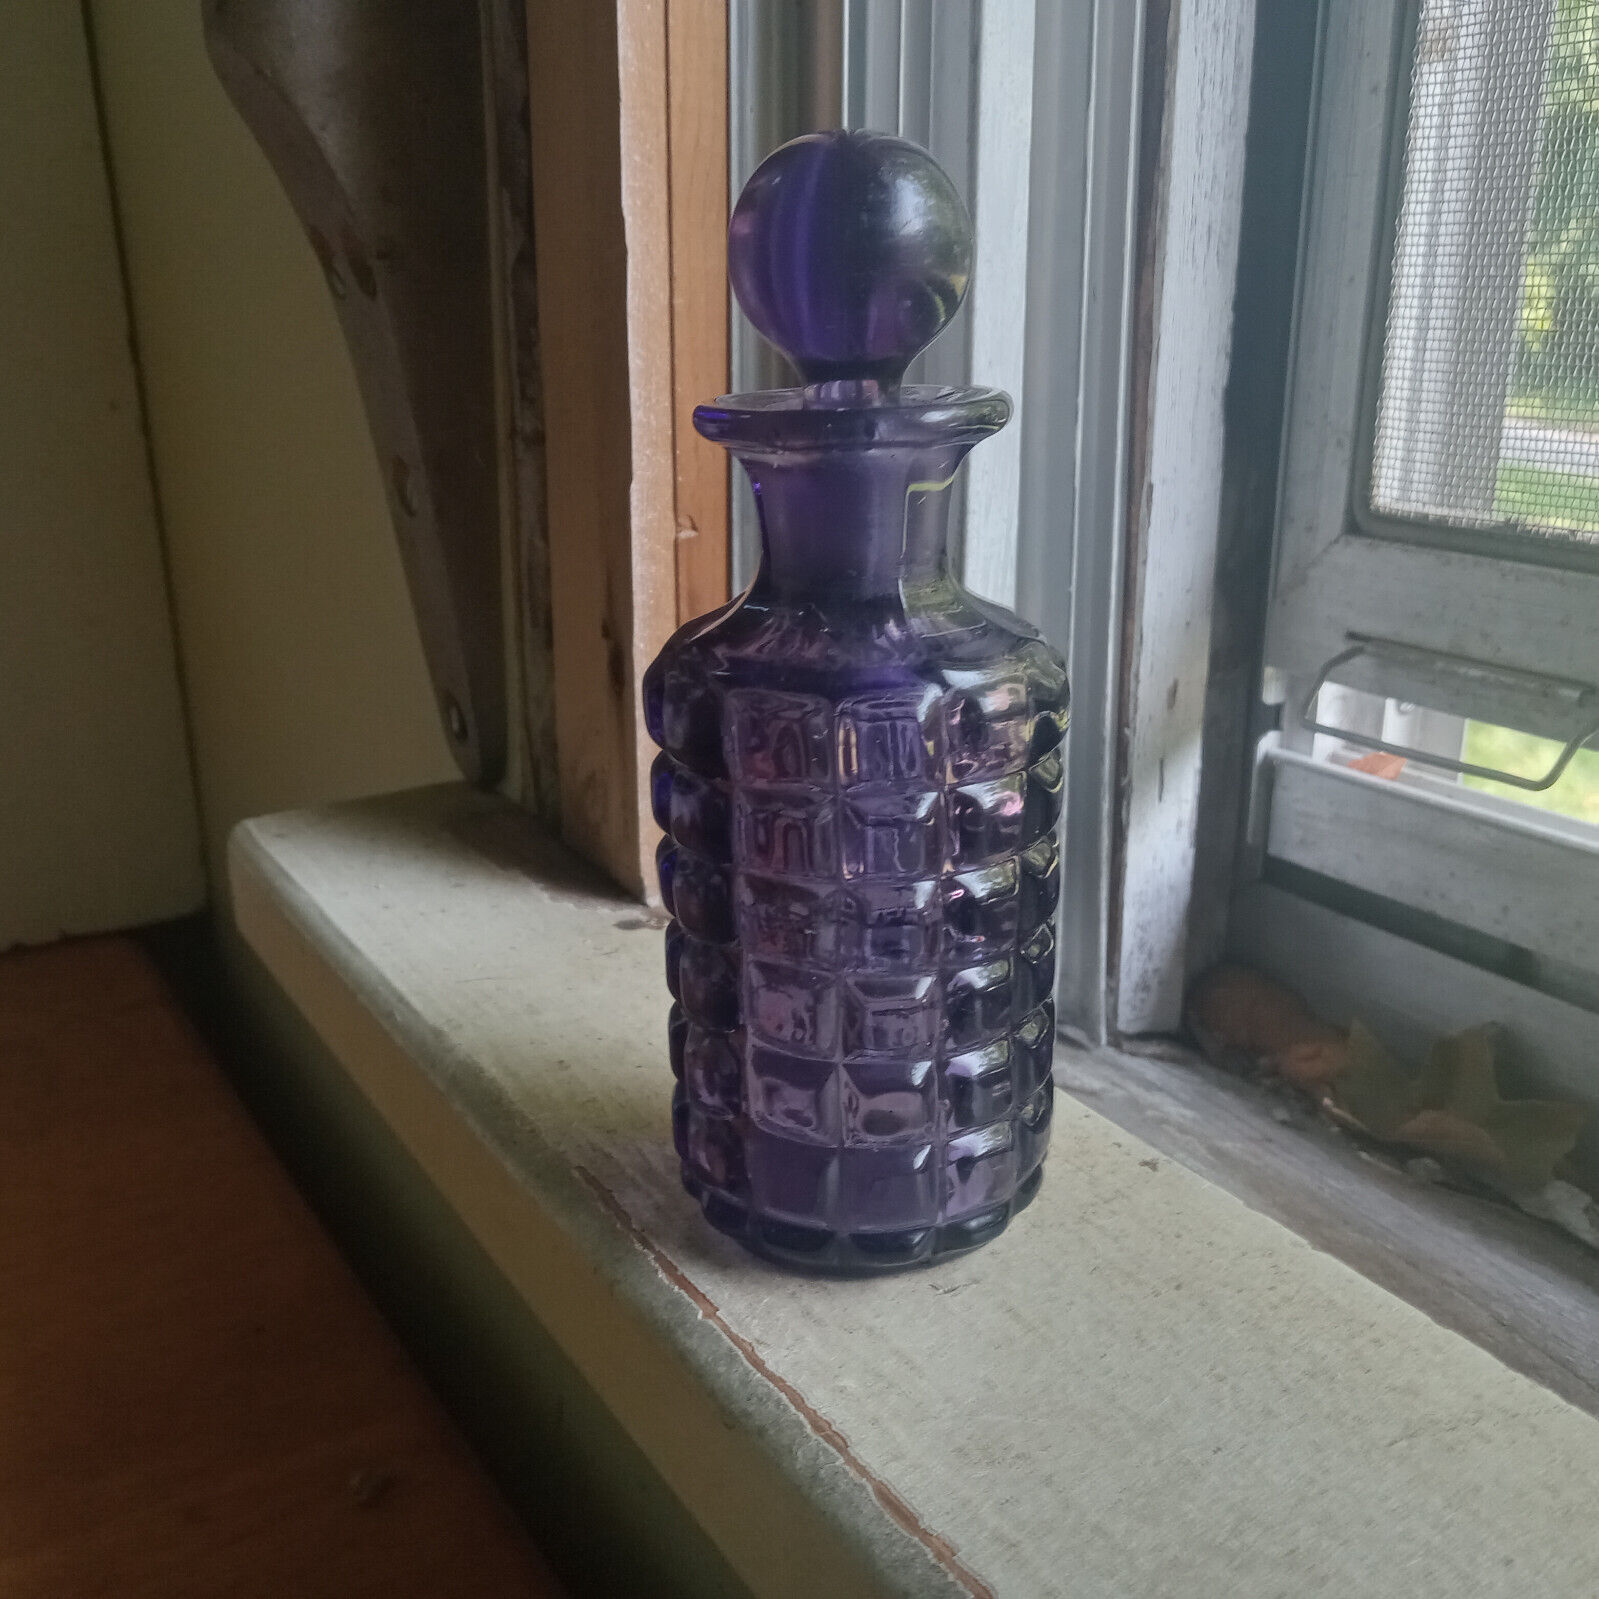 1890s PRETTY AMETHYST SQUARE BLOCK PATTERN COLOGNE PERFUME BOTTLE WITH STOPPER